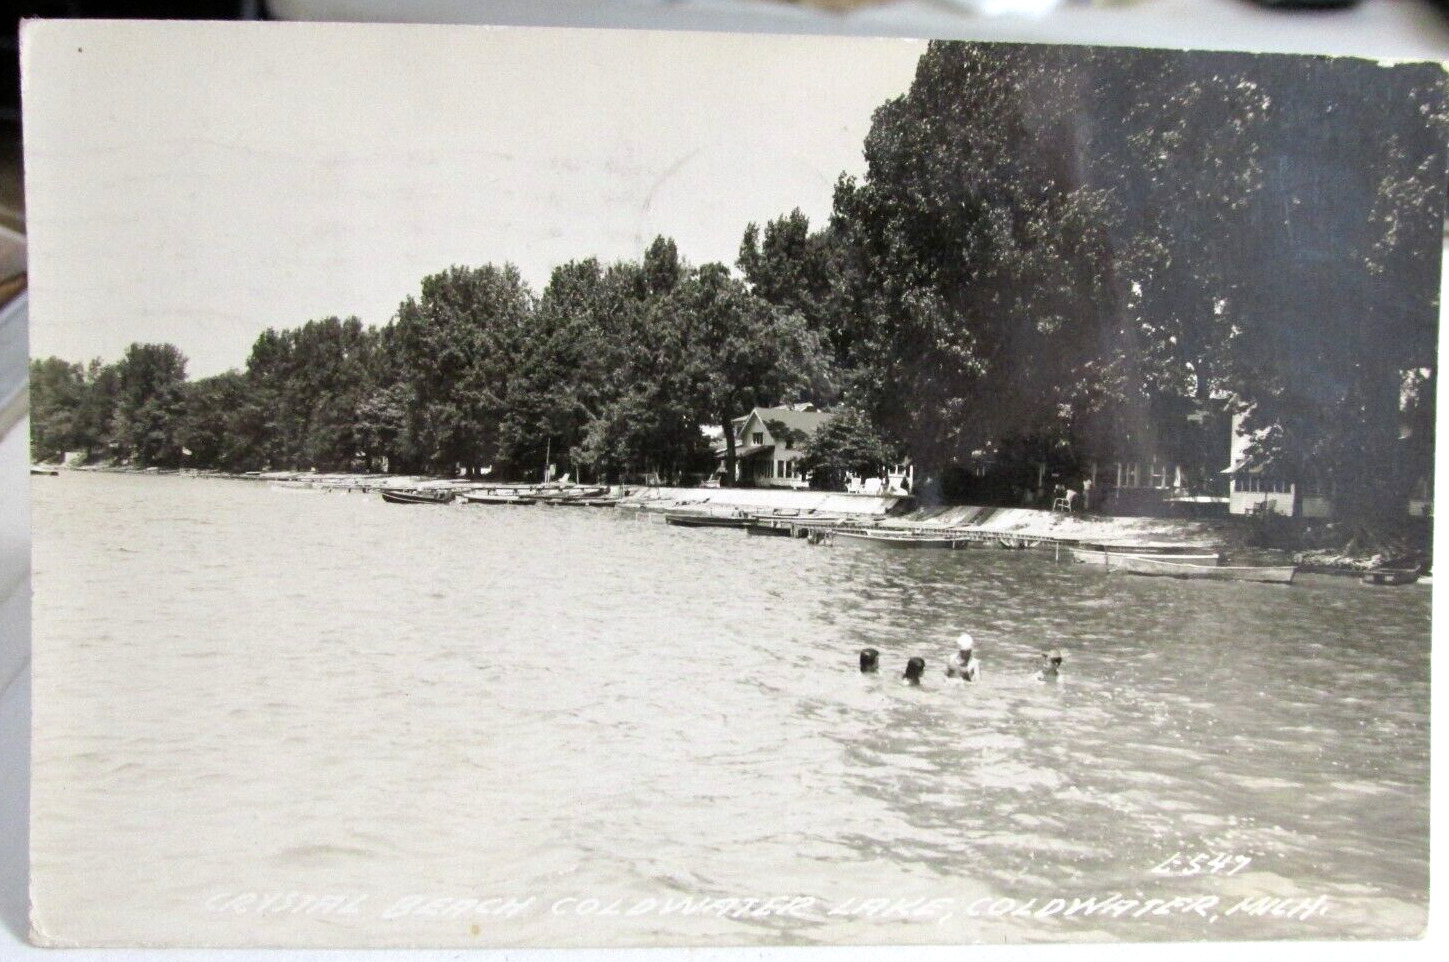 1947 COLDWATER MICHIGAN RPPC Real Photo Postcard Crystal Beach Coldwater Lake